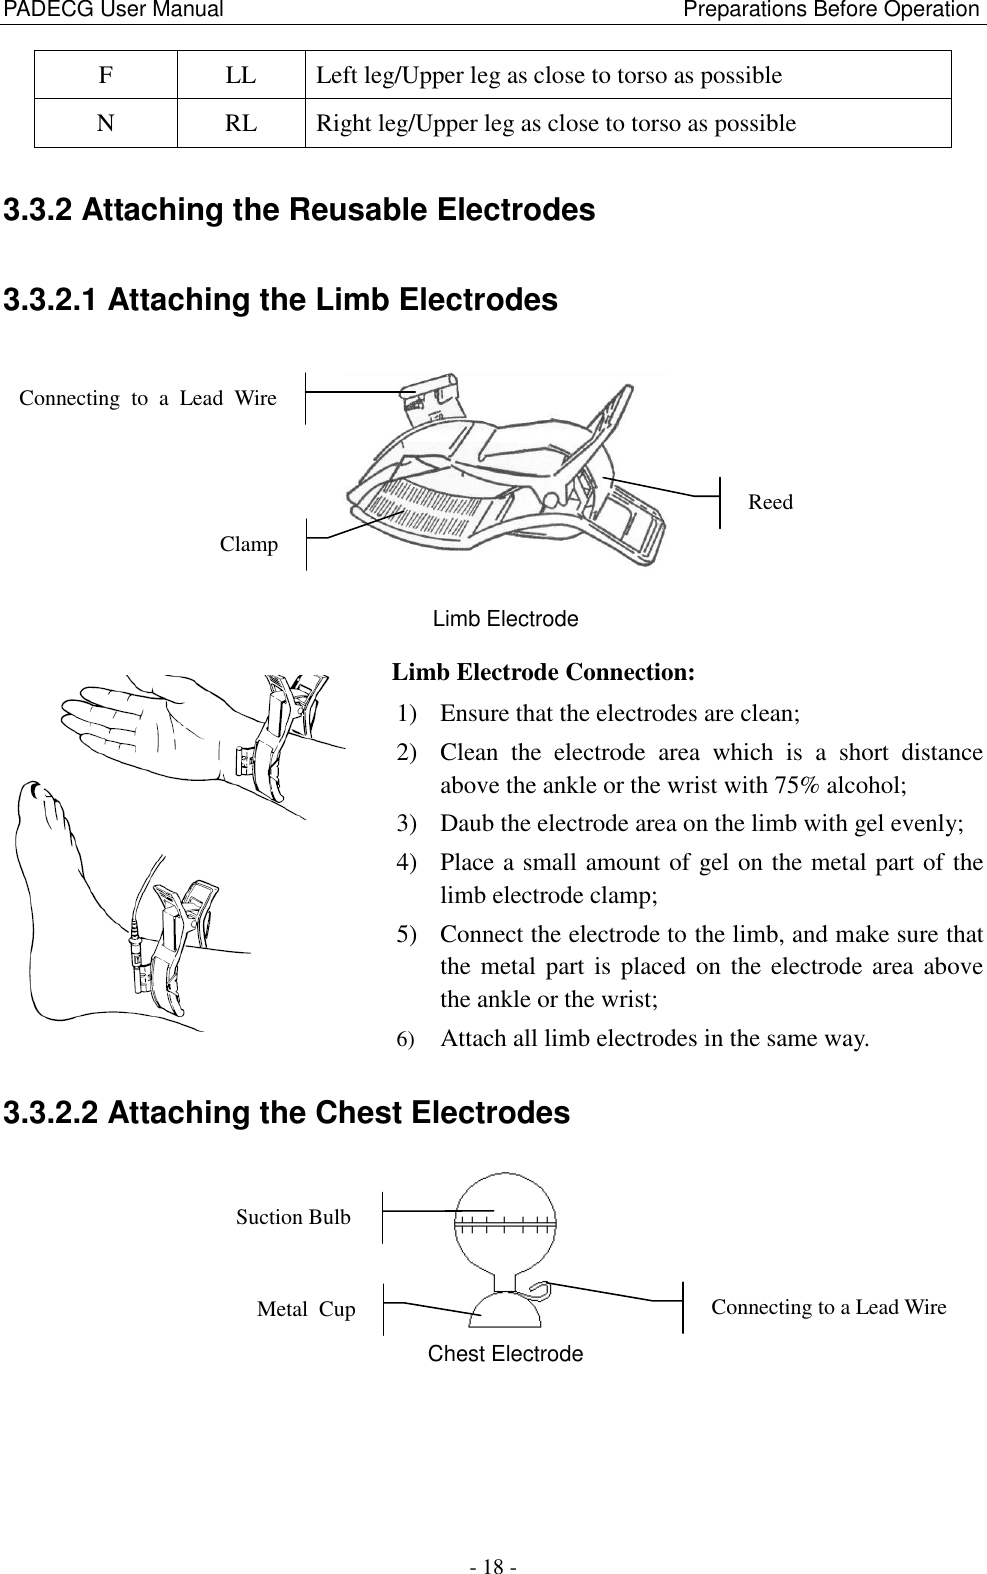 PADECG User Manual                                                                         Preparations Before Operation - 18 - F LL Left leg/Upper leg as close to torso as possible N RL Right leg/Upper leg as close to torso as possible 3.3.2 Attaching the Reusable Electrodes 3.3.2.1 Attaching the Limb Electrodes  Limb Electrode        Limb Electrode Connection: 1) Ensure that the electrodes are clean; 2) Clean  the  electrode  area  which  is  a  short  distance above the ankle or the wrist with 75% alcohol; 3) Daub the electrode area on the limb with gel evenly; 4) Place a small amount of gel on the metal part of the limb electrode clamp; 5) Connect the electrode to the limb, and make sure that the metal part is placed on the electrode area above the ankle or the wrist; 6) Attach all limb electrodes in the same way. 3.3.2.2 Attaching the Chest Electrodes  Chest Electrode Reed Connecting  to  a  Lead  Wire Clamp Suction Bulb Connecting to a Lead Wire Metal  Cup 